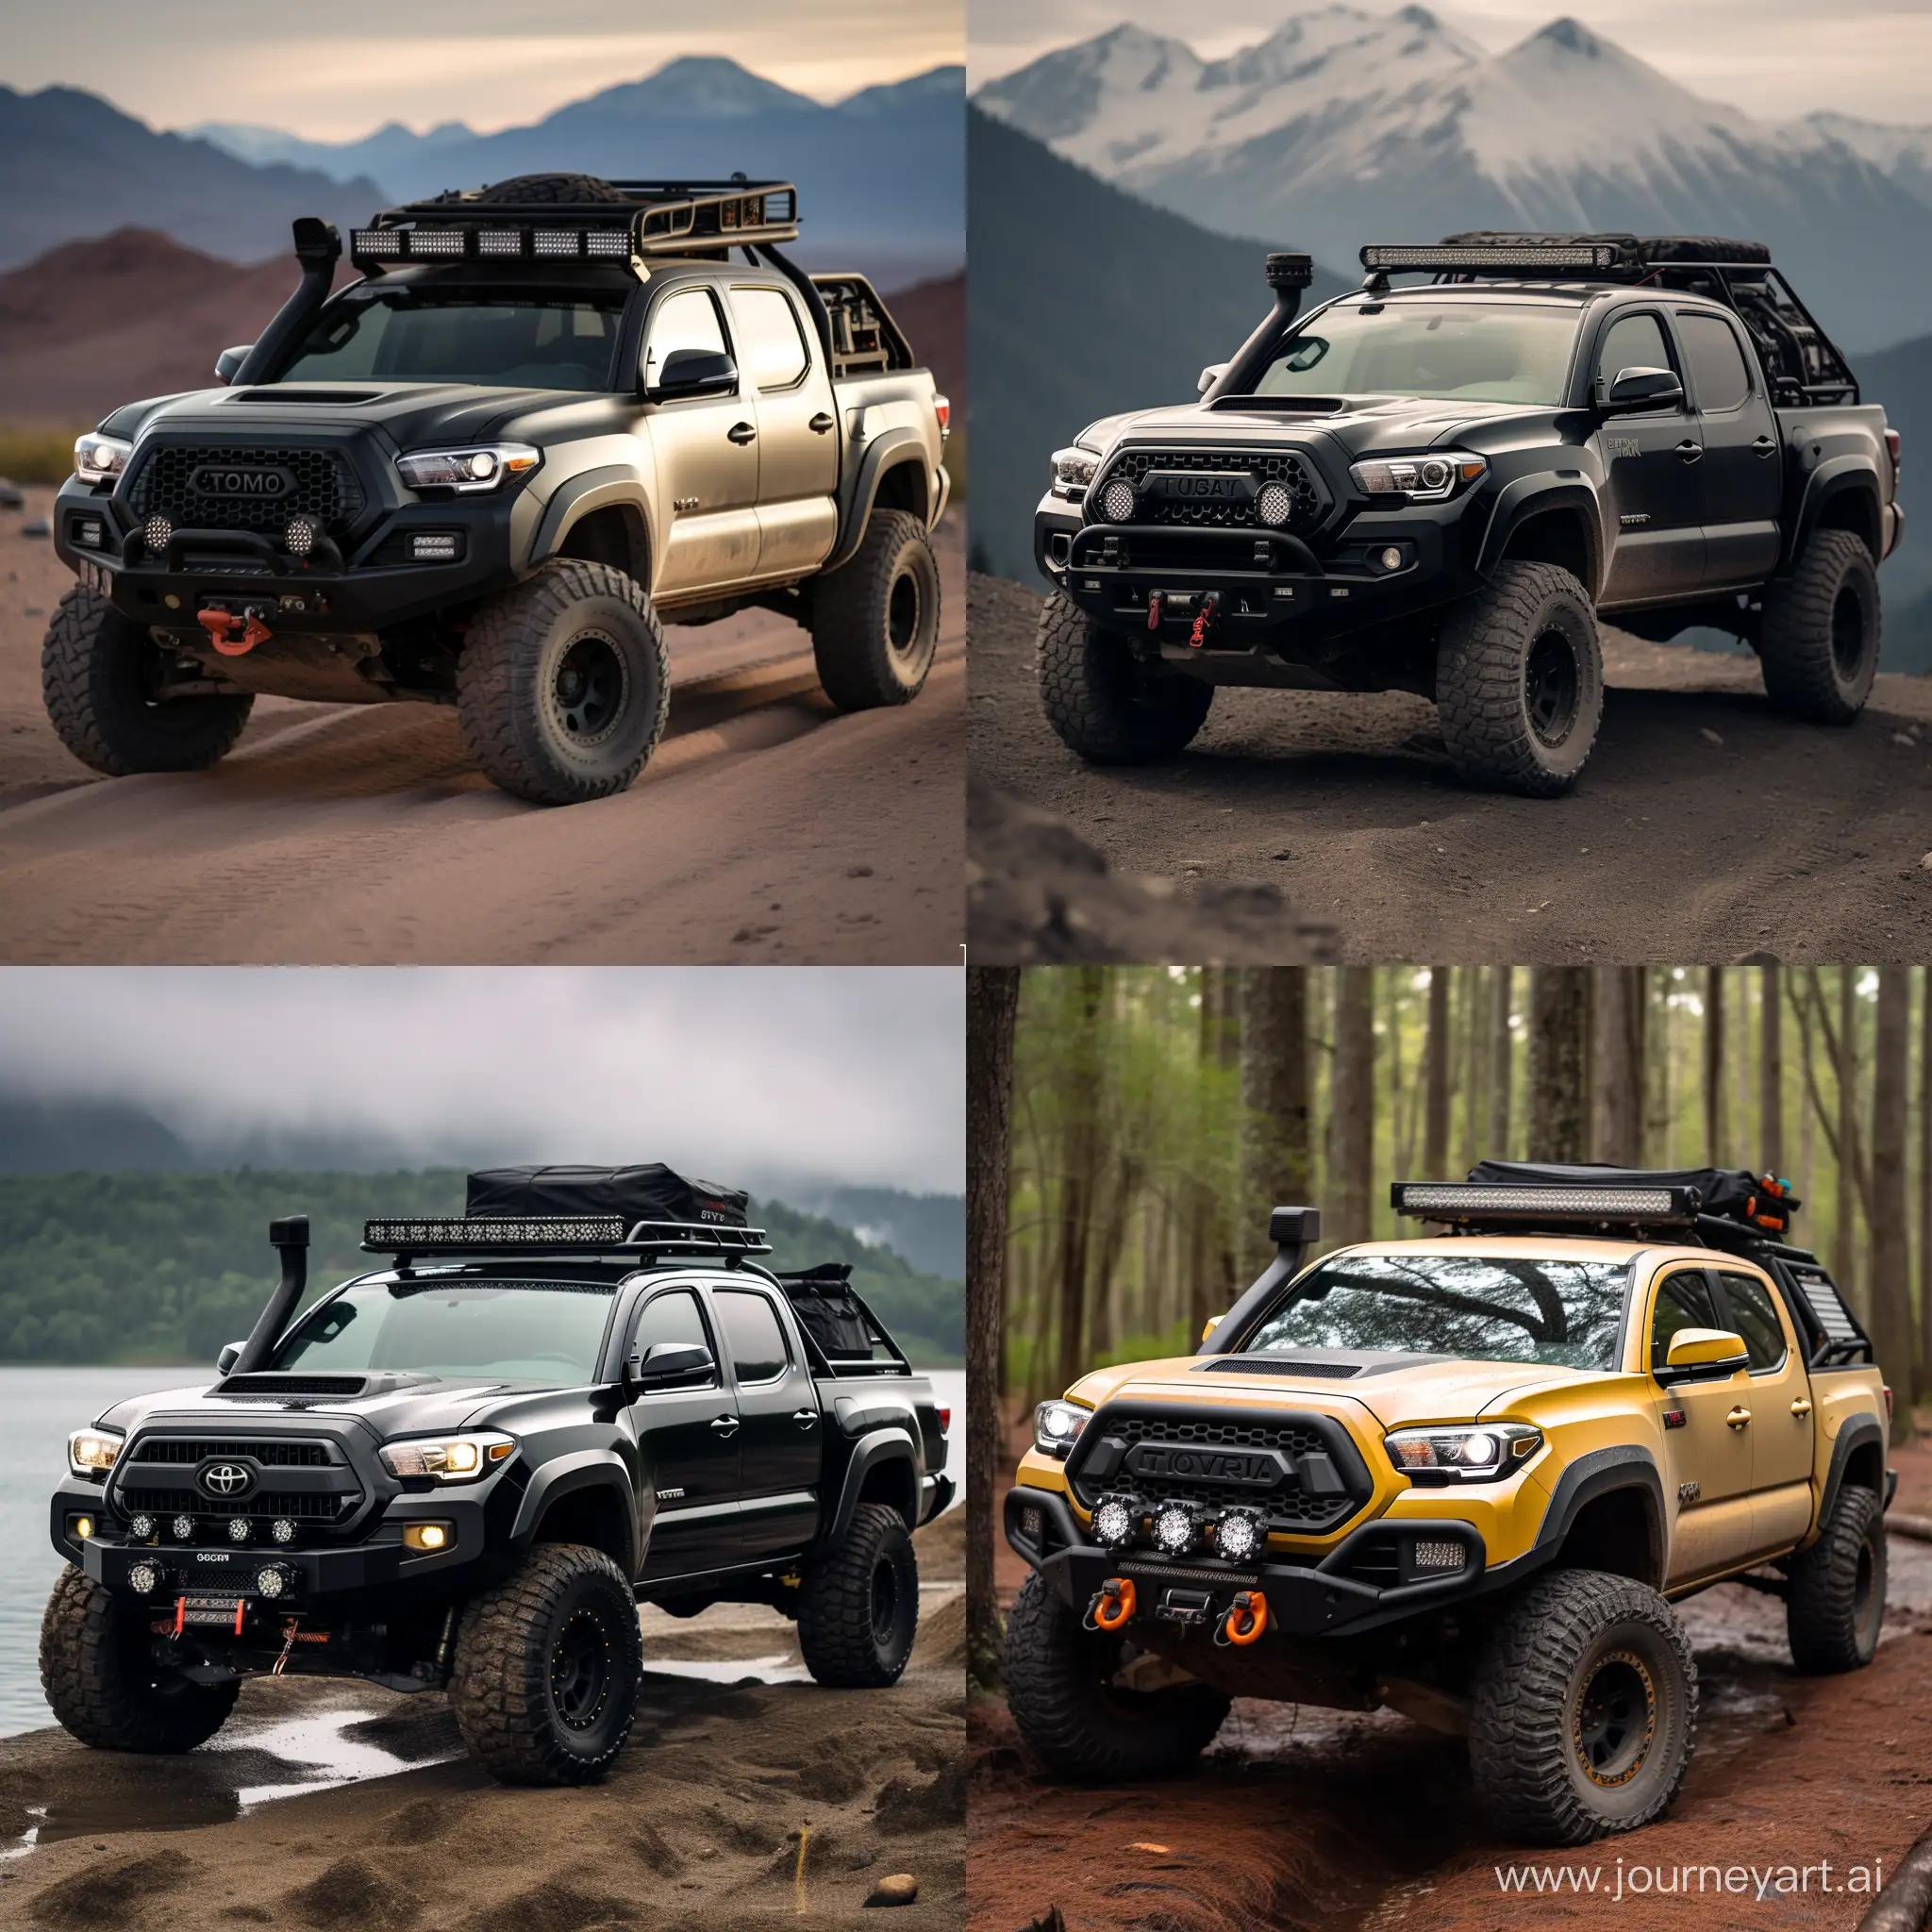 Customized-Toyota-Tacoma-OffRoad-Truck-with-11-Aspect-Ratio-Priced-at-58999